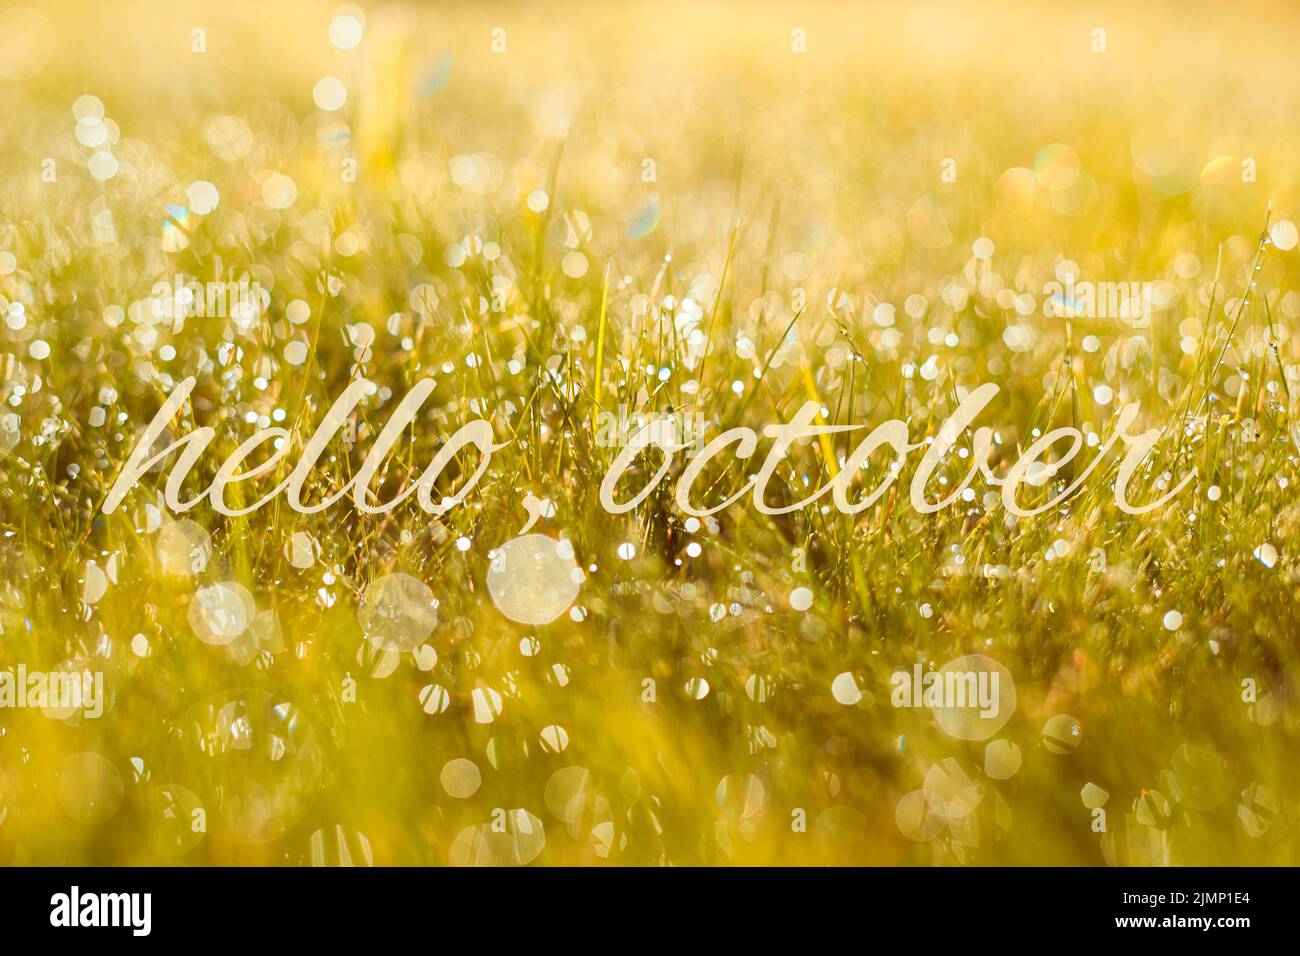 Autumn, fall banner with greeting Hello October, golden field with meadow grass, in sunset rays Stock Photo